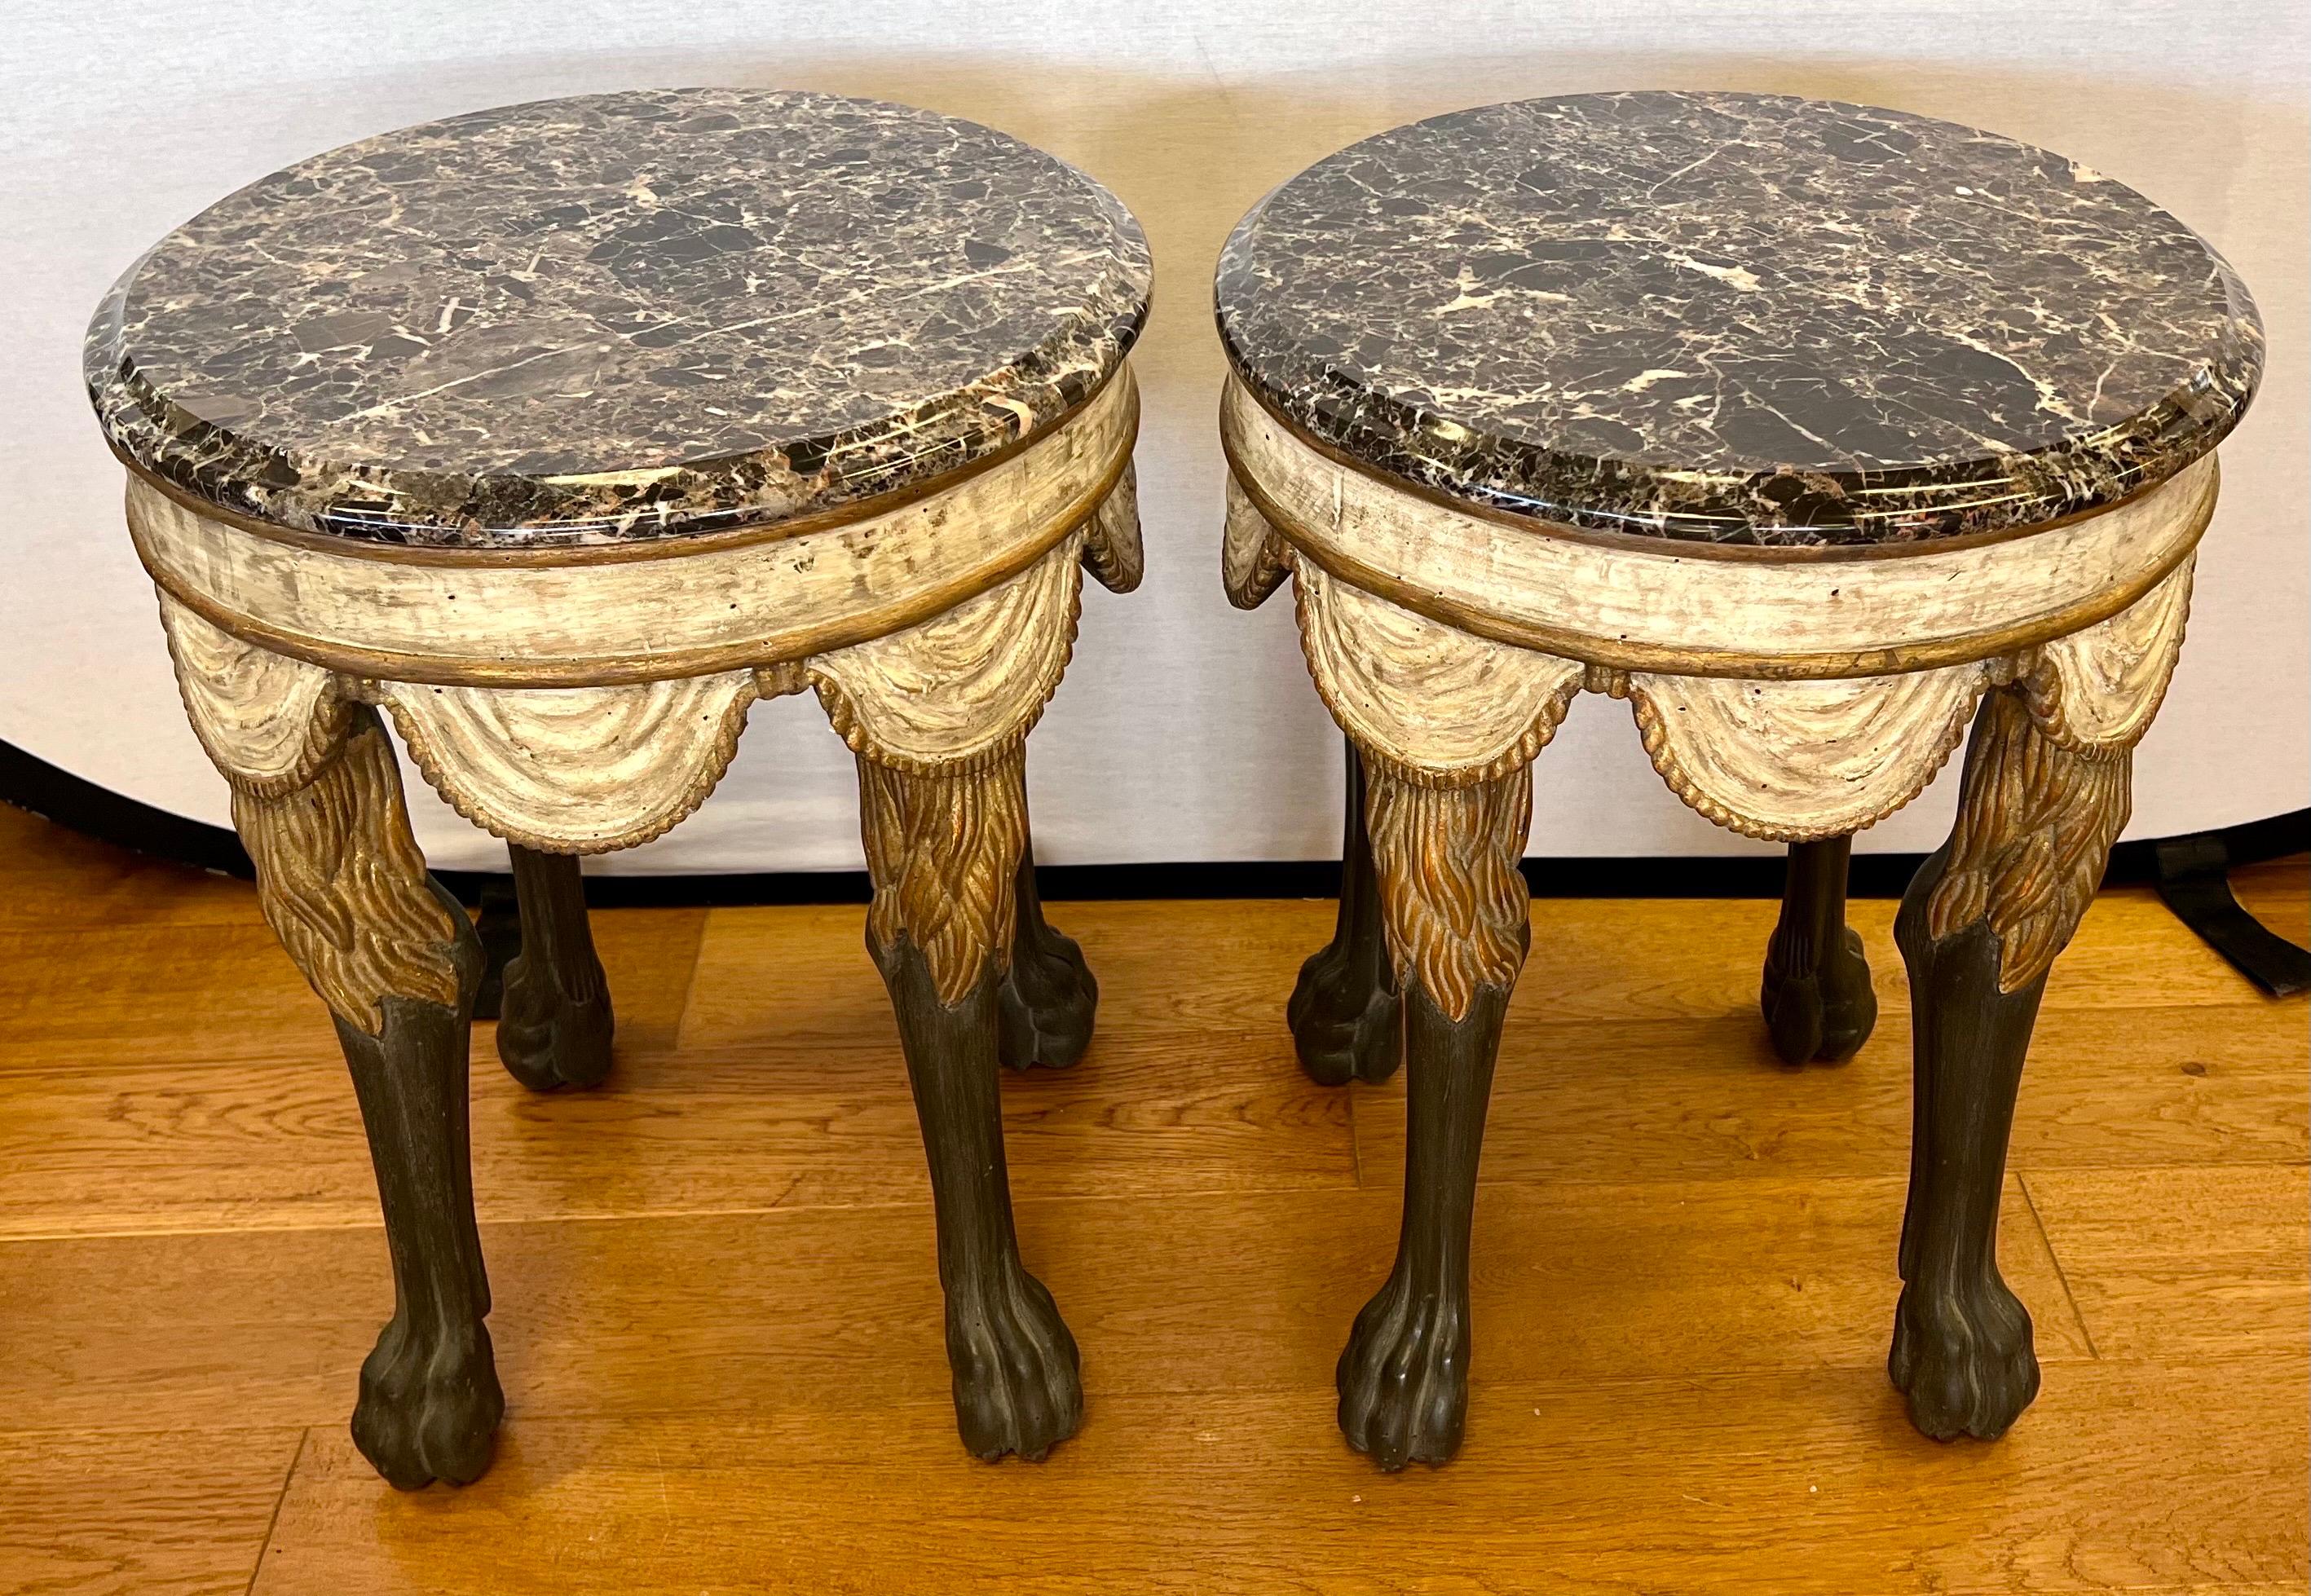 Elegant pair of Neapolitan style tables or stolls with the round marble top on a hand carved and hand painted, with swagged fabric and stylized lions legs and paws.